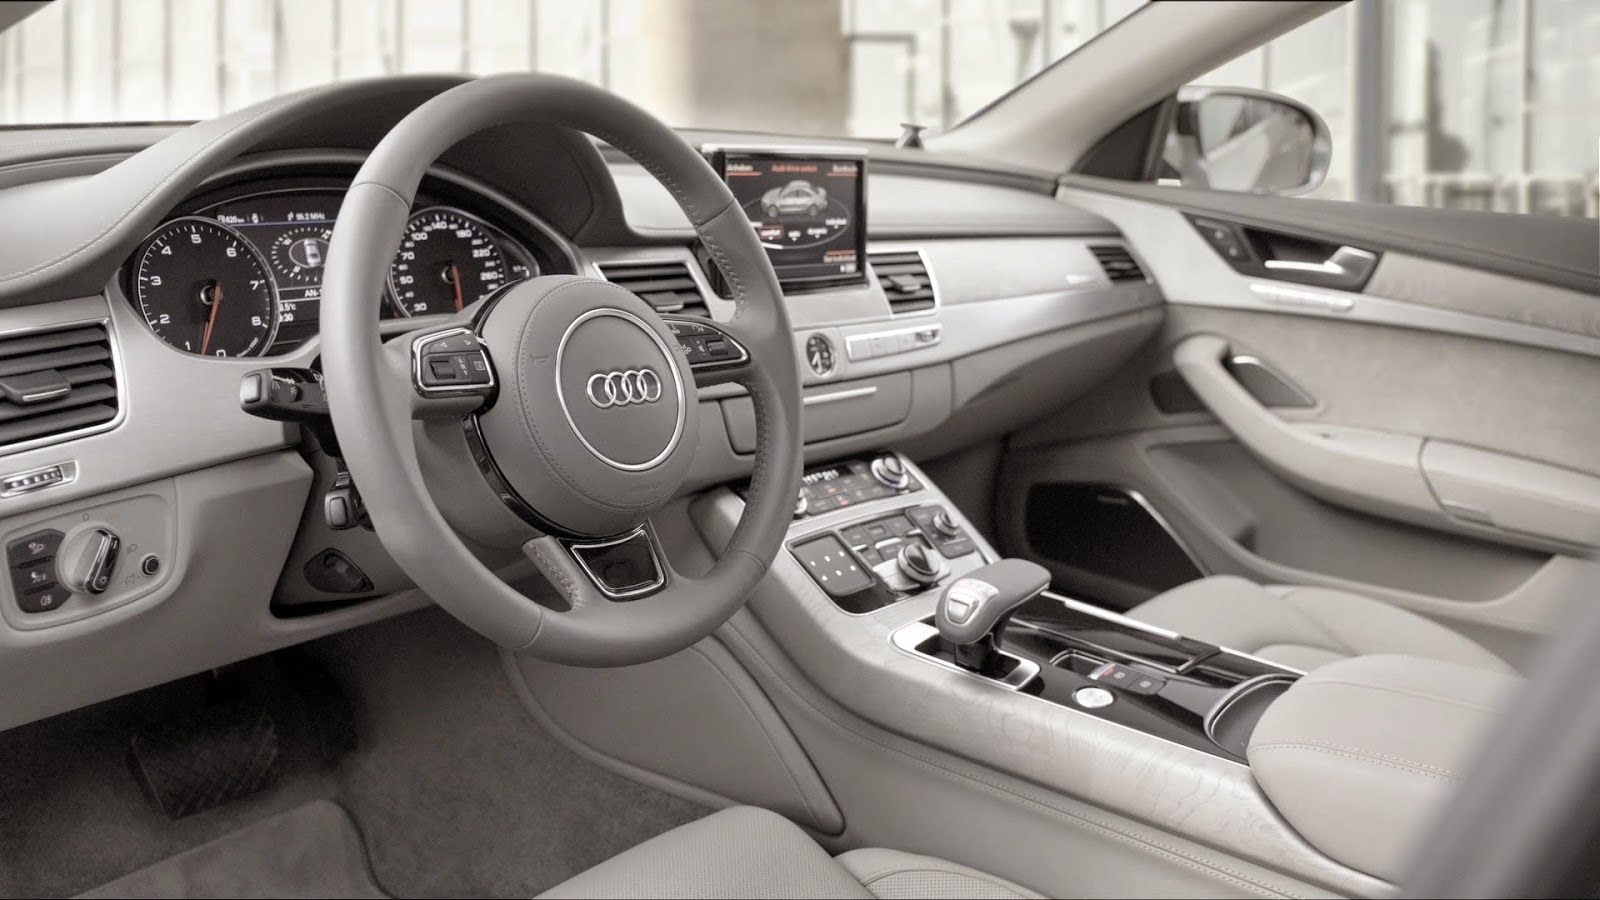 Interior Audi A8 Design is the best in US and UK